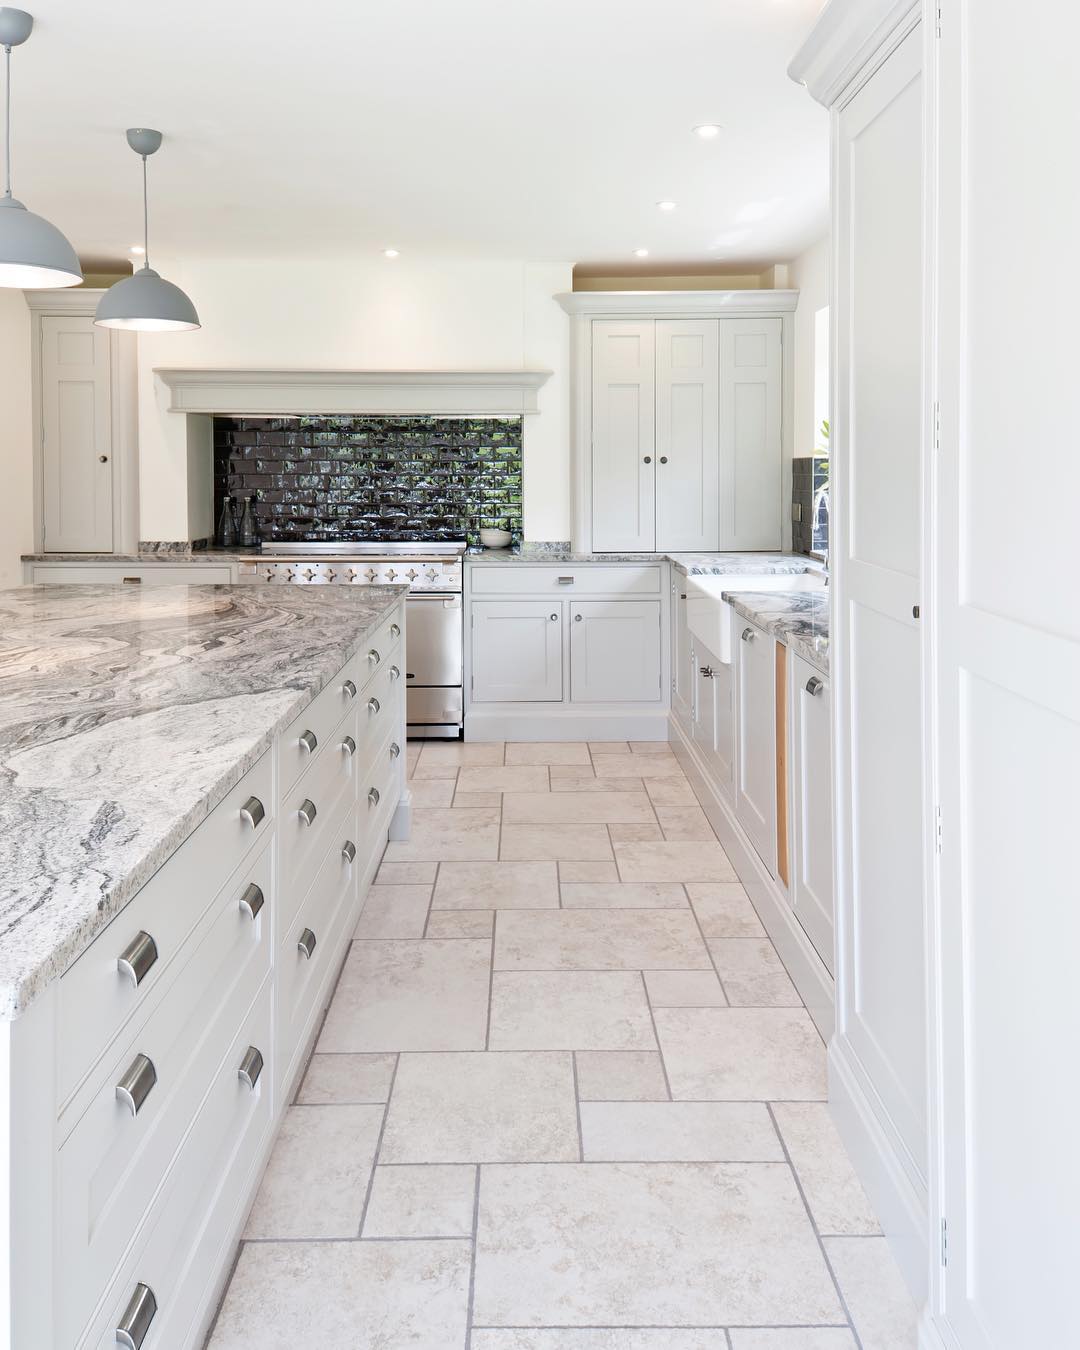 Kitchen with marble and tile. Photo by Instagram user @collinsbespoke